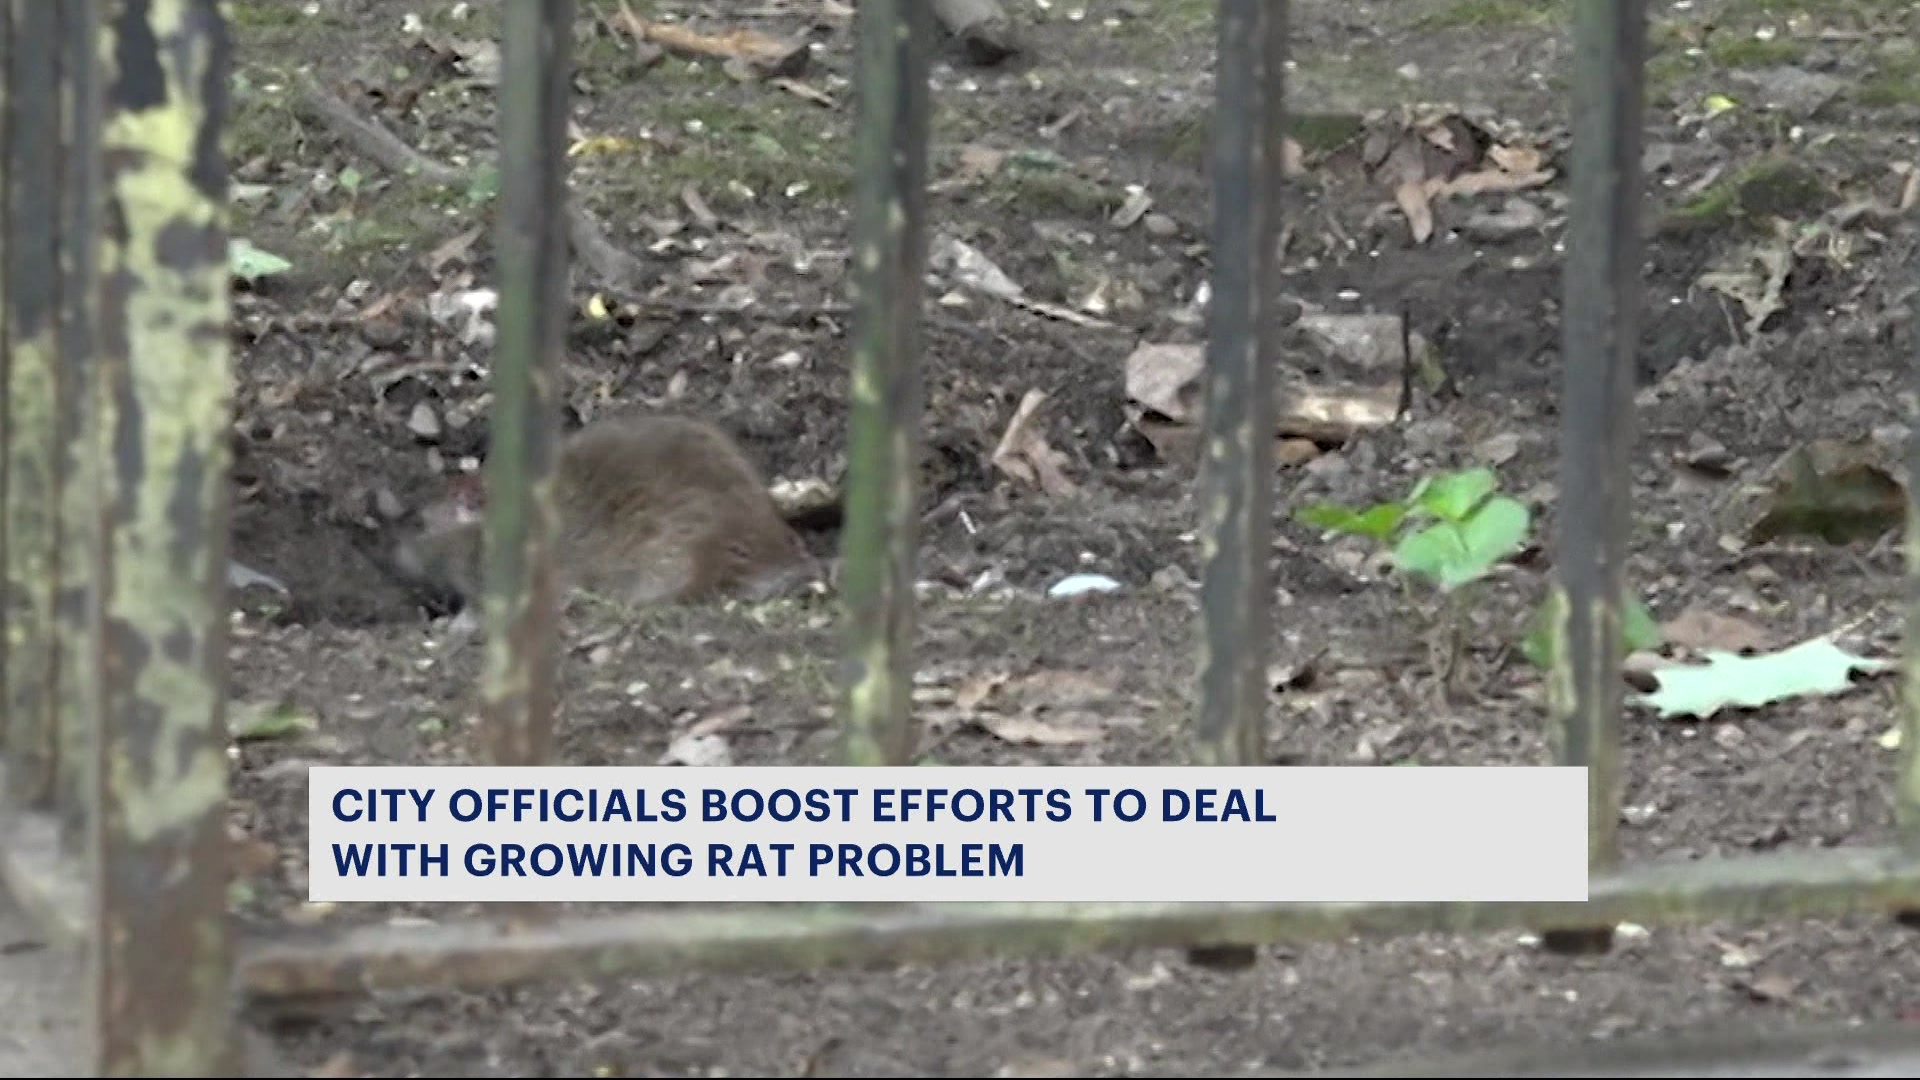 Officials ramping up efforts in war on city rats